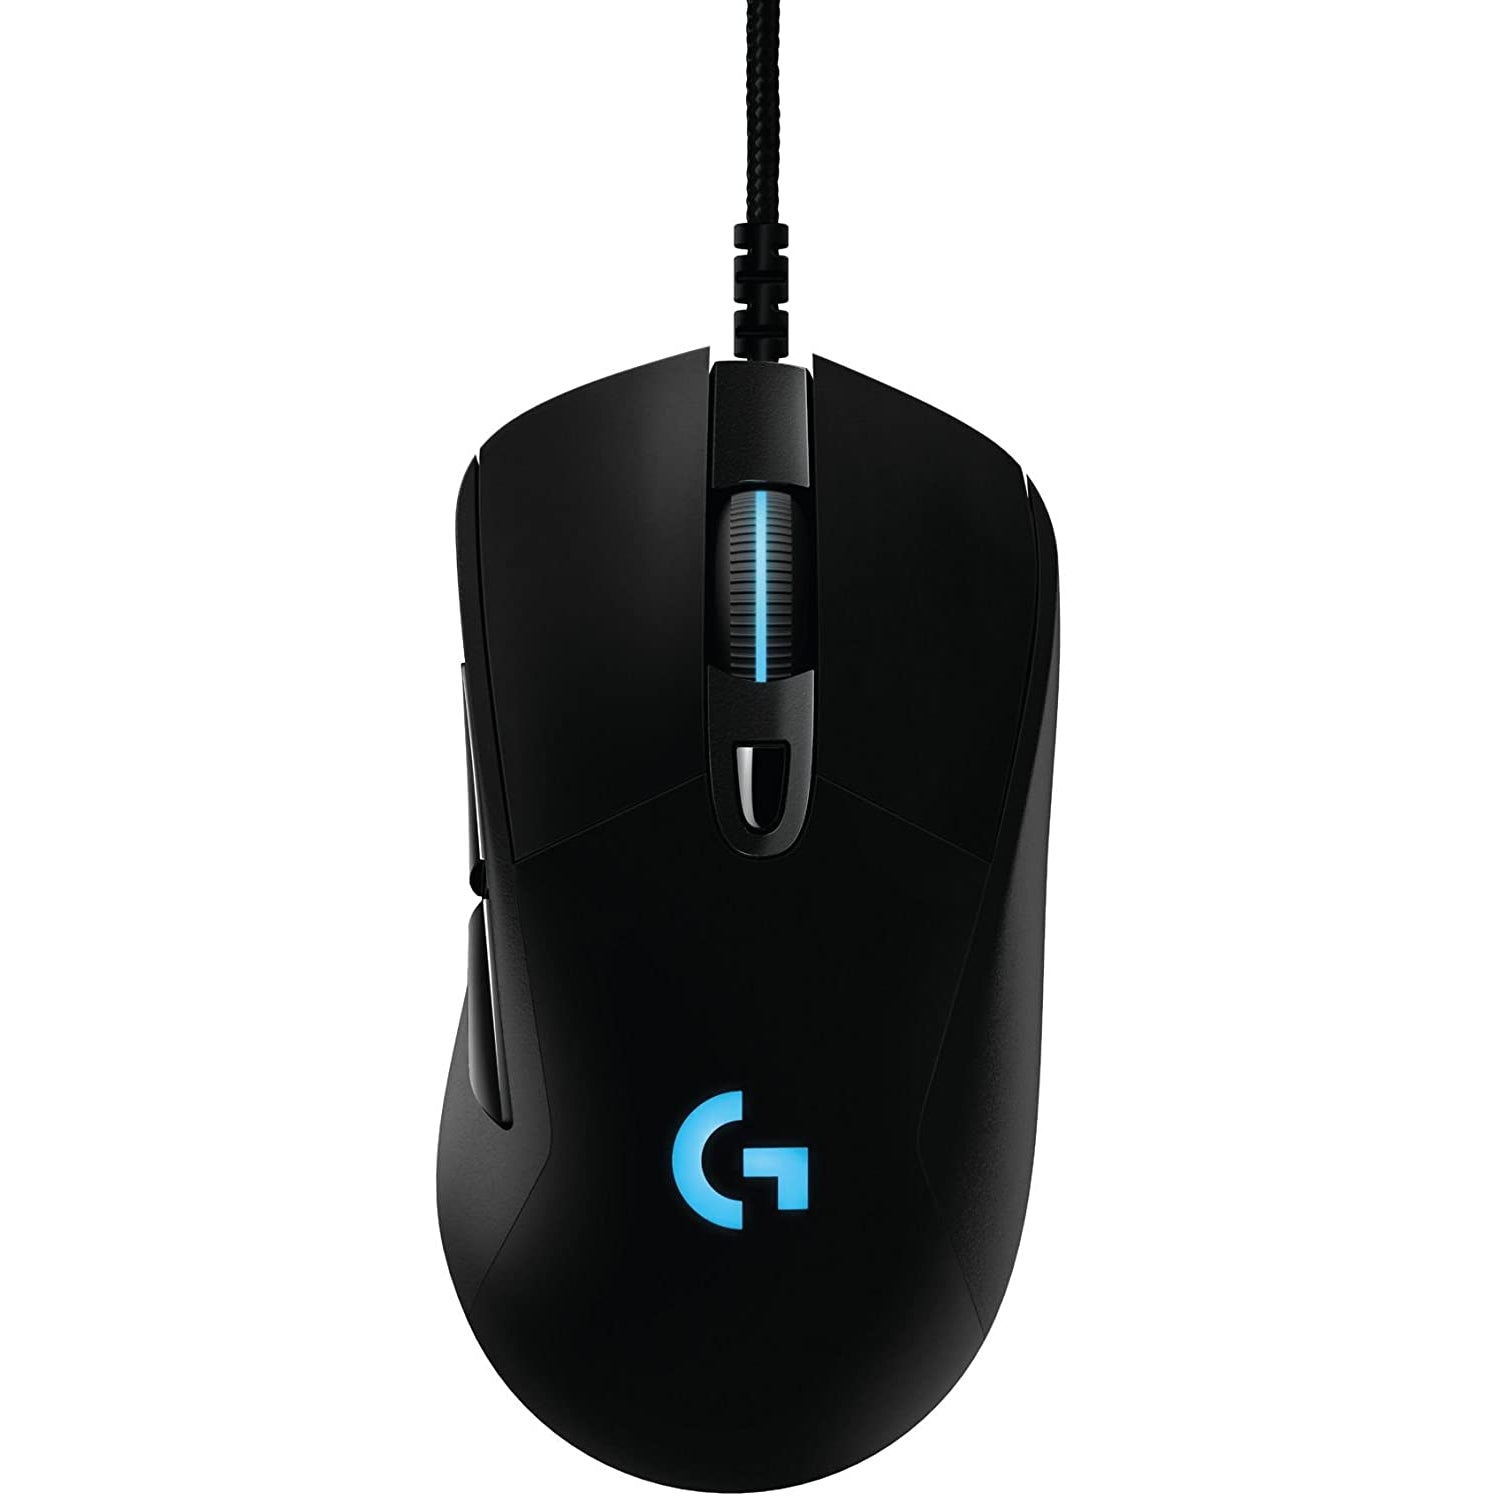 Logitech G403 Prodigy Wired Gaming Mouse - Refurbished Pristine